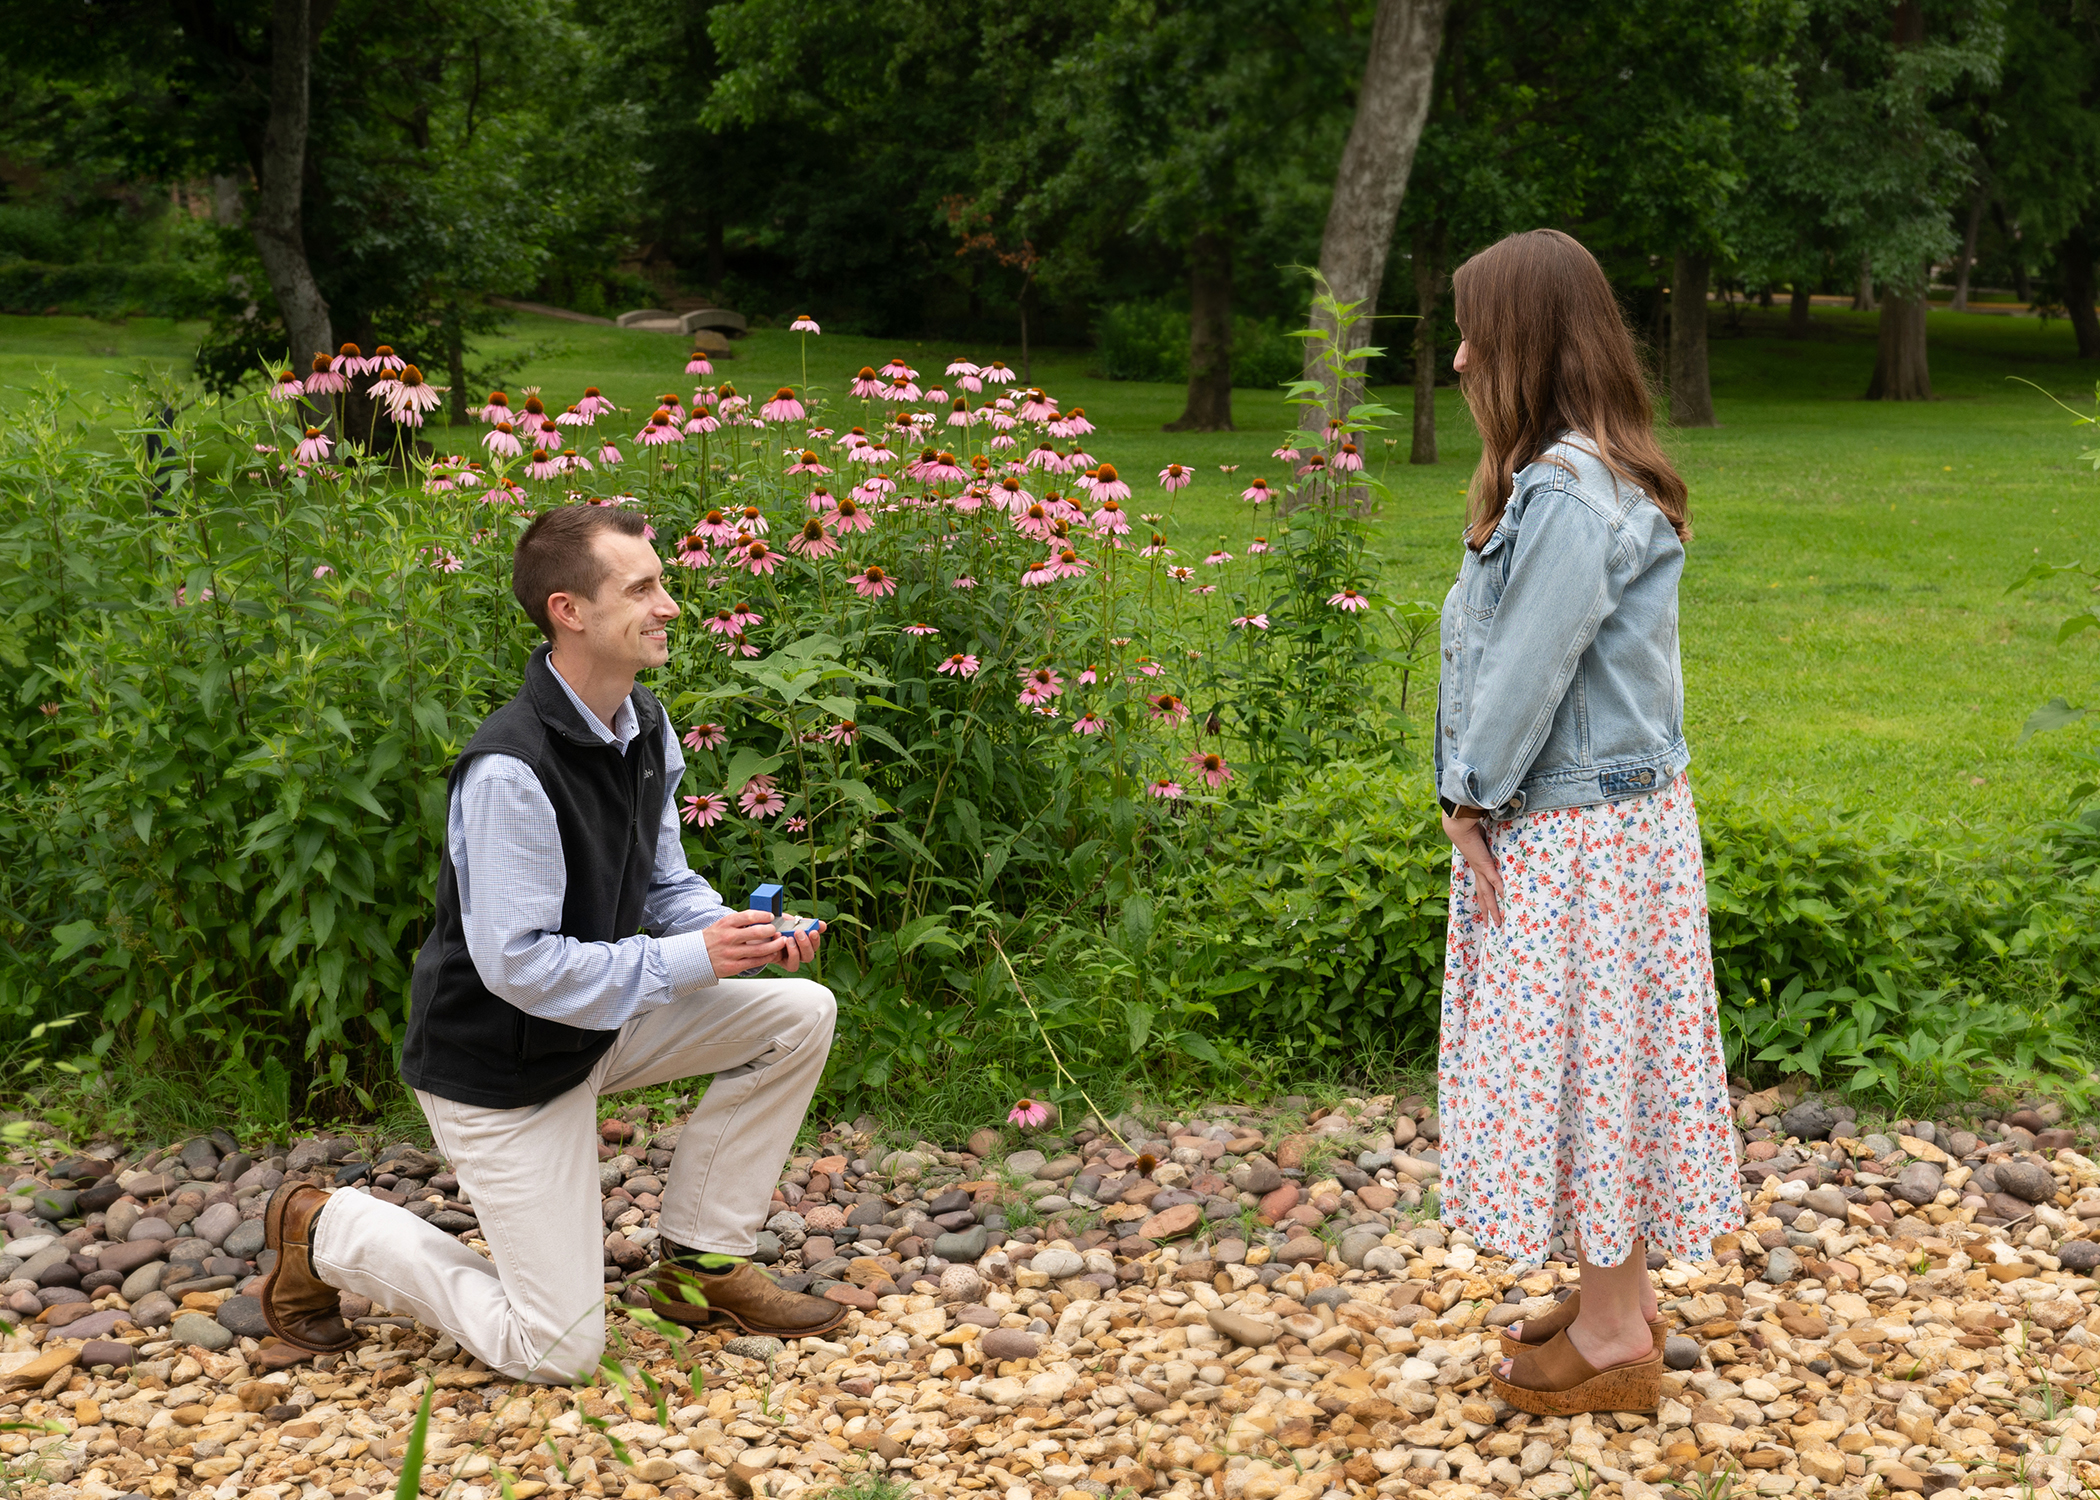 Proposal photography for couples